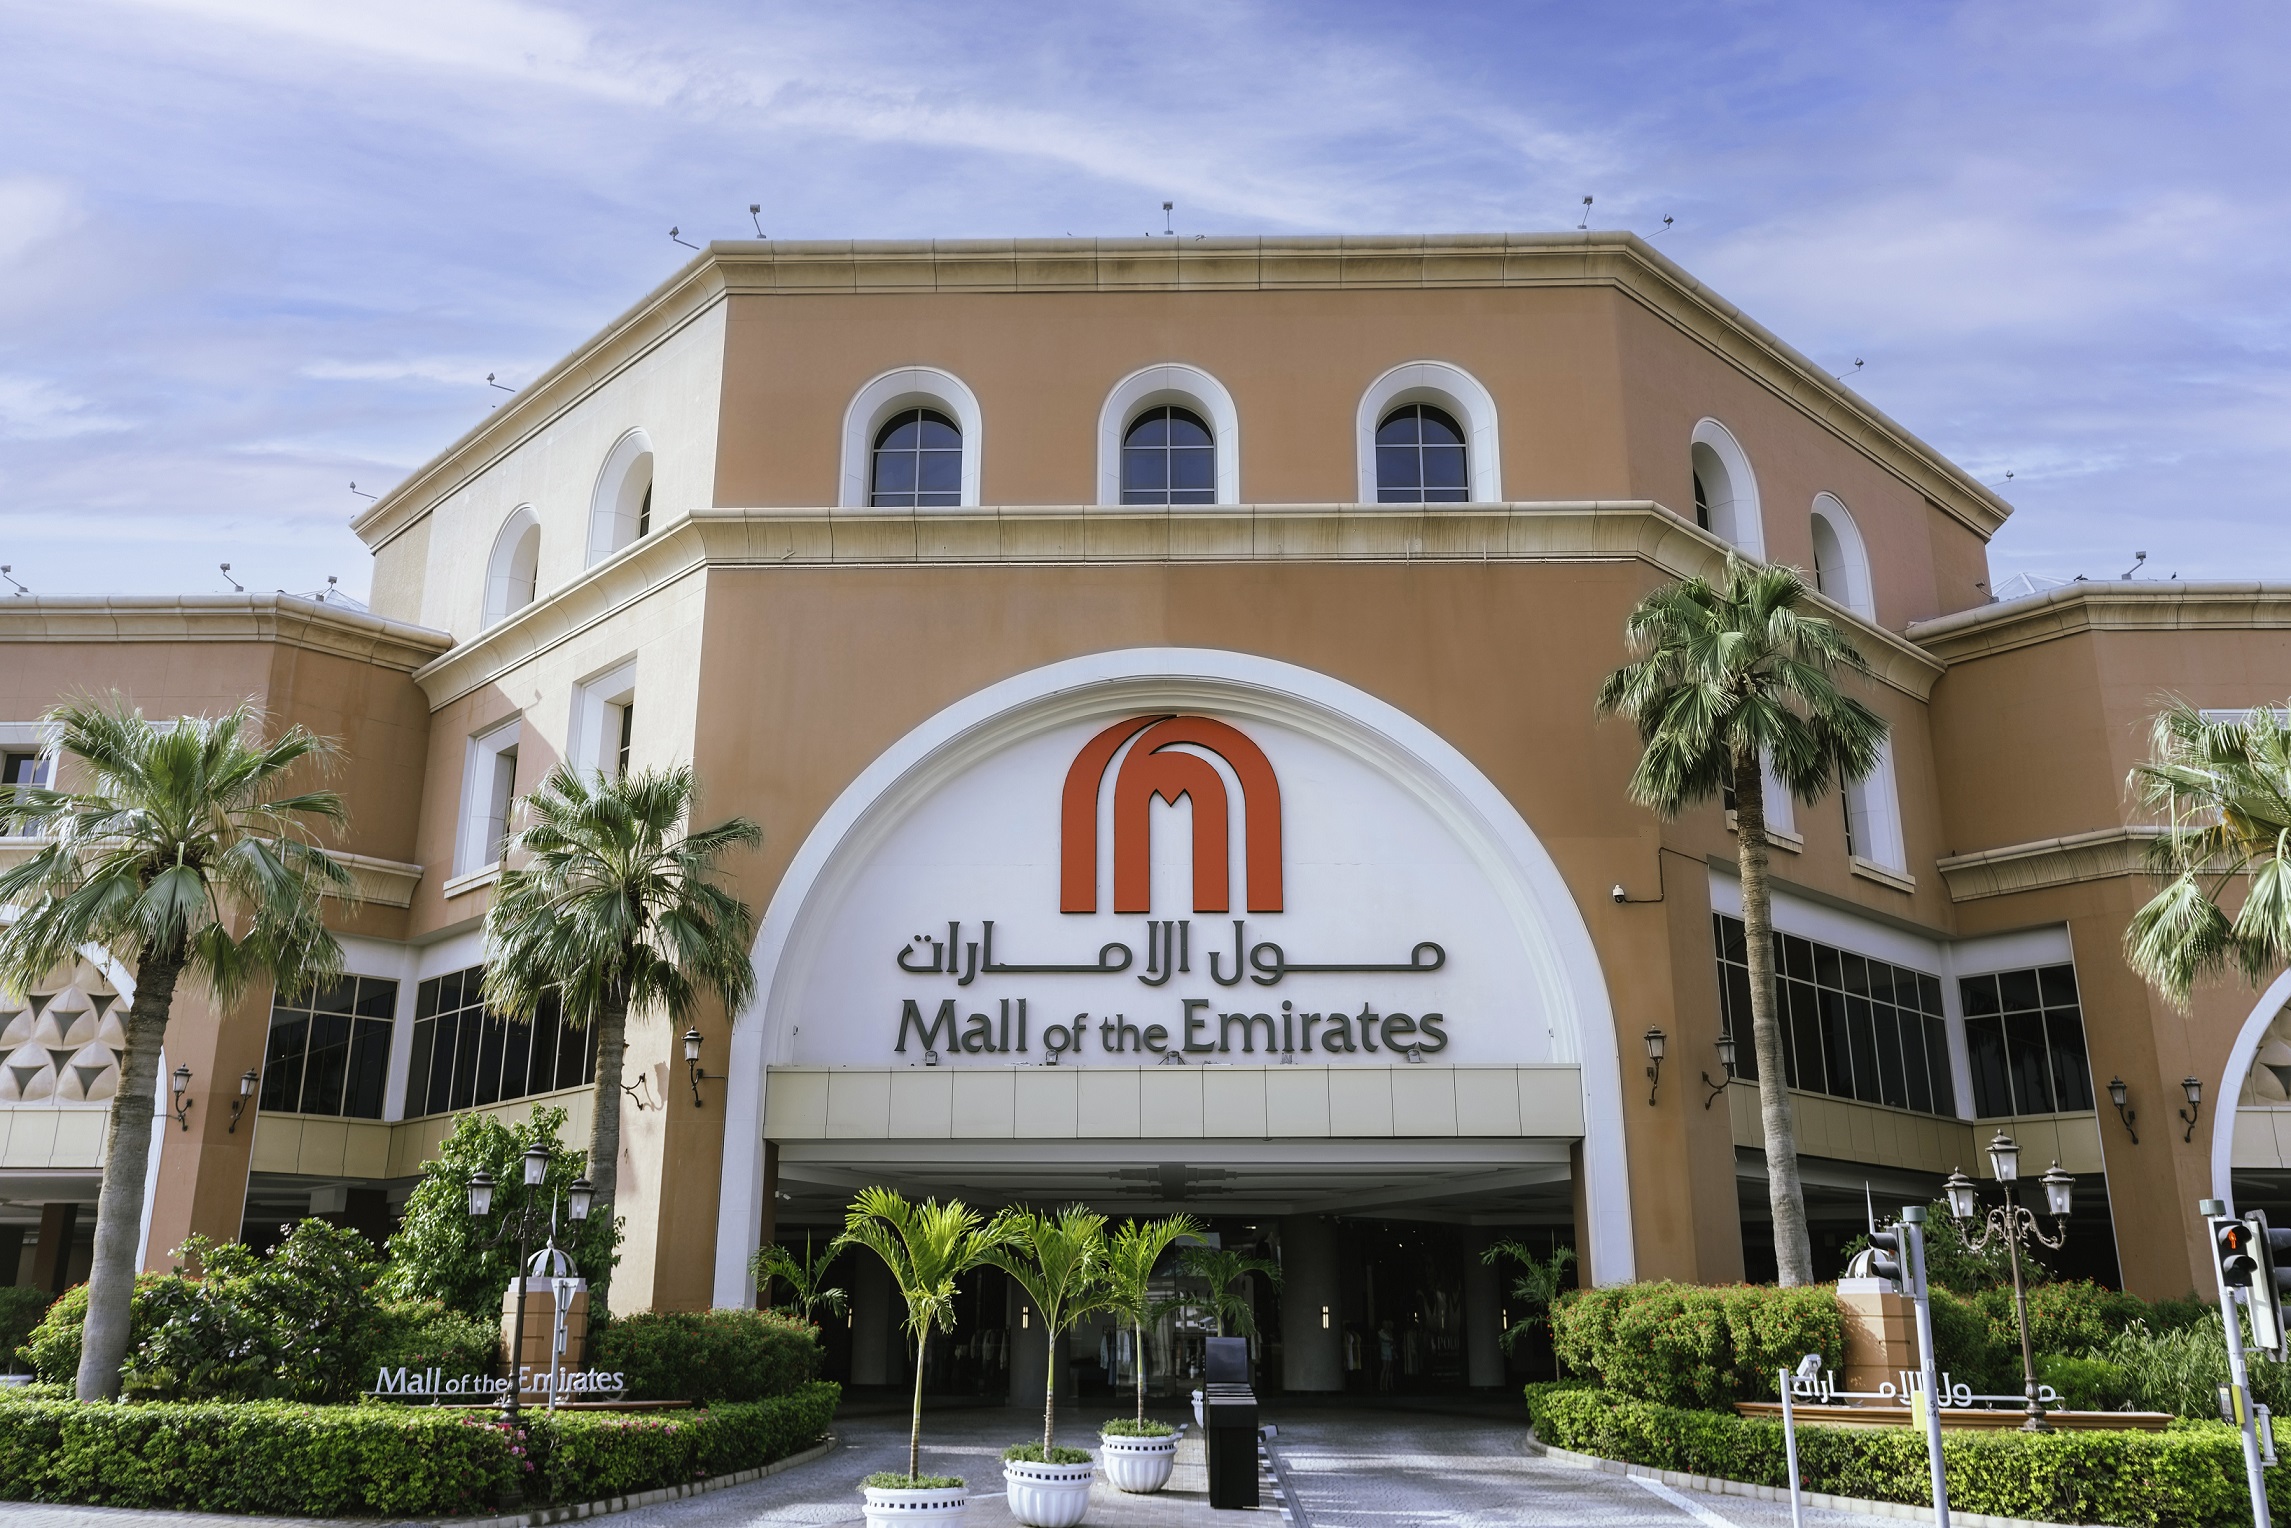 Mall of the Emirates undergoes brand refresh - Campaign Middle East